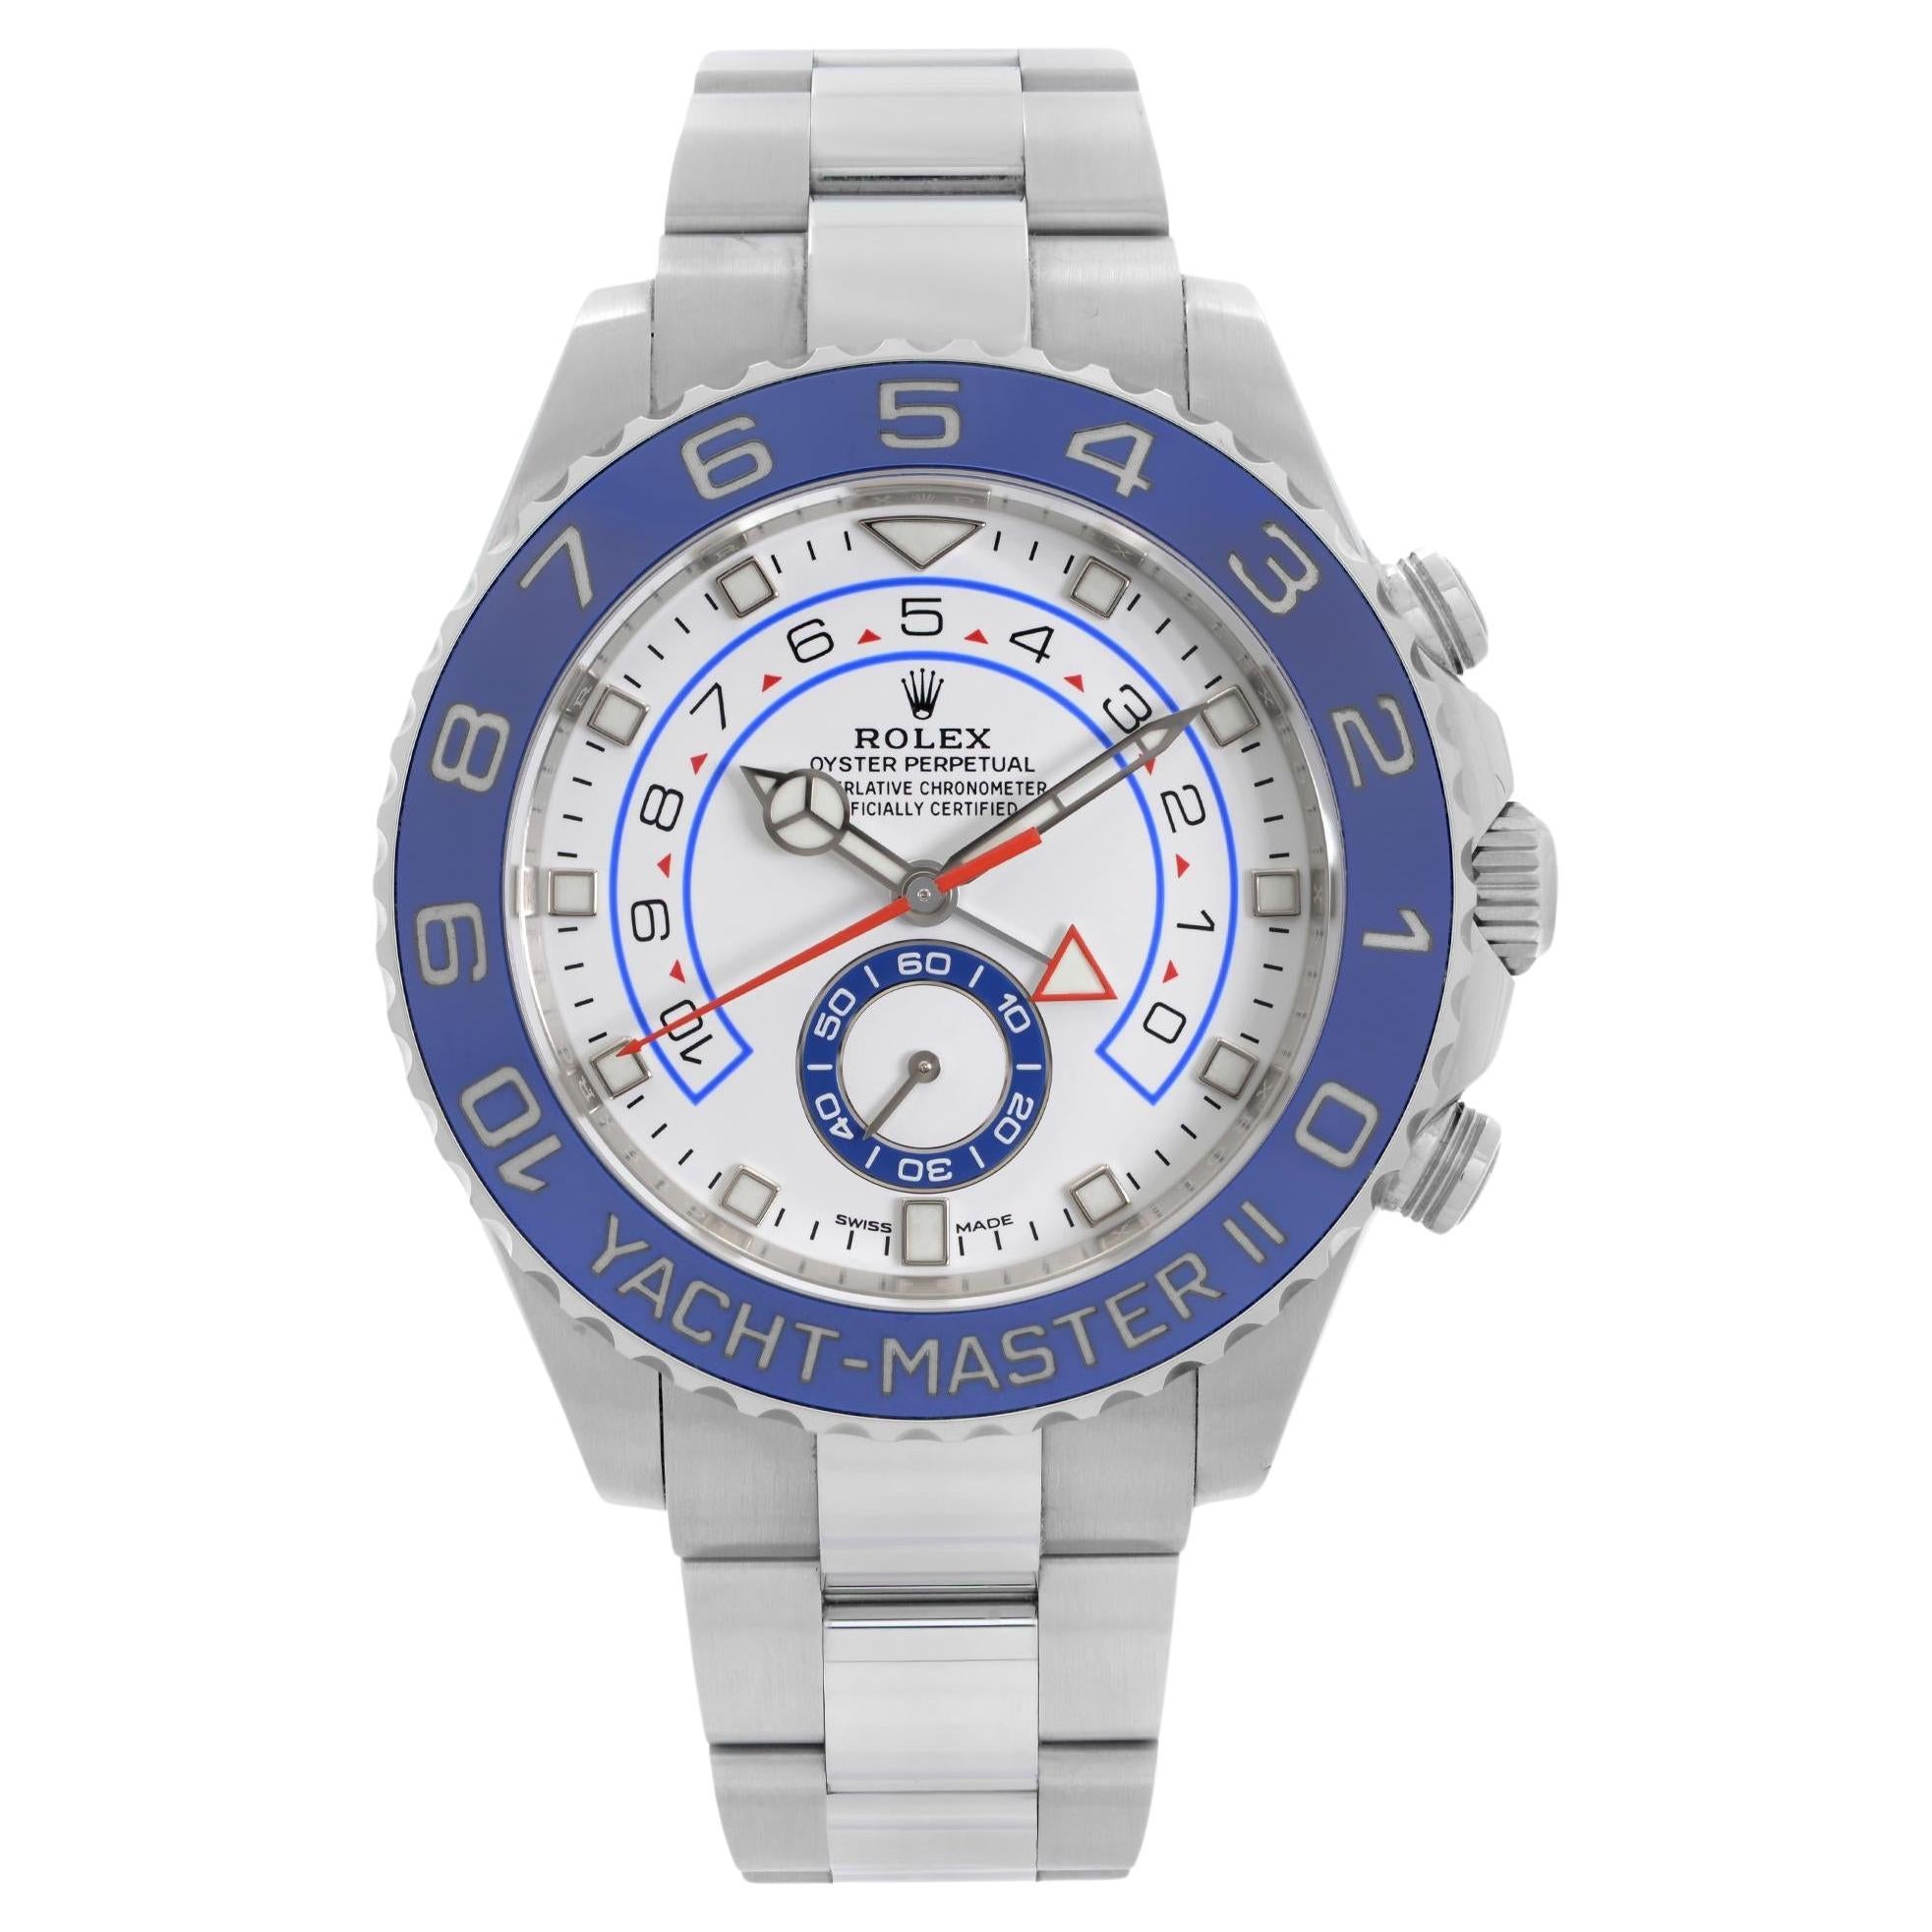 NEW Rolex Yacht-Master II 44mm Ceramic Steel White Dial Automatic  Watch 116680 For Sale